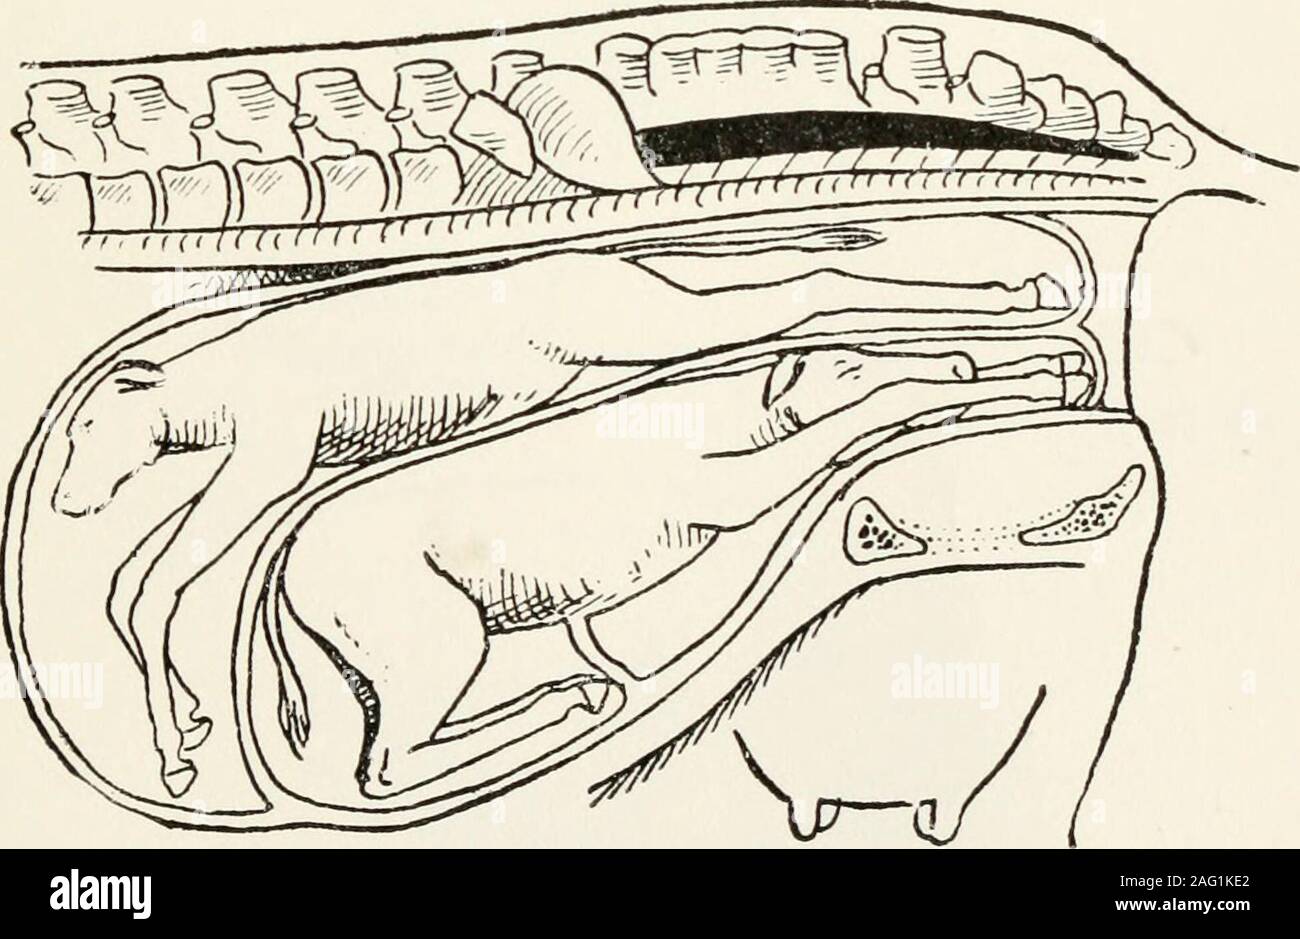 . Elementary lectures on veterinary science, for agricultural students, farmers, and stockkeepers ... Fig. i8, par. 782. ms. Fig. 19, par. 782. t^LATE LI Pig- 20, par. 784 Stock Photo